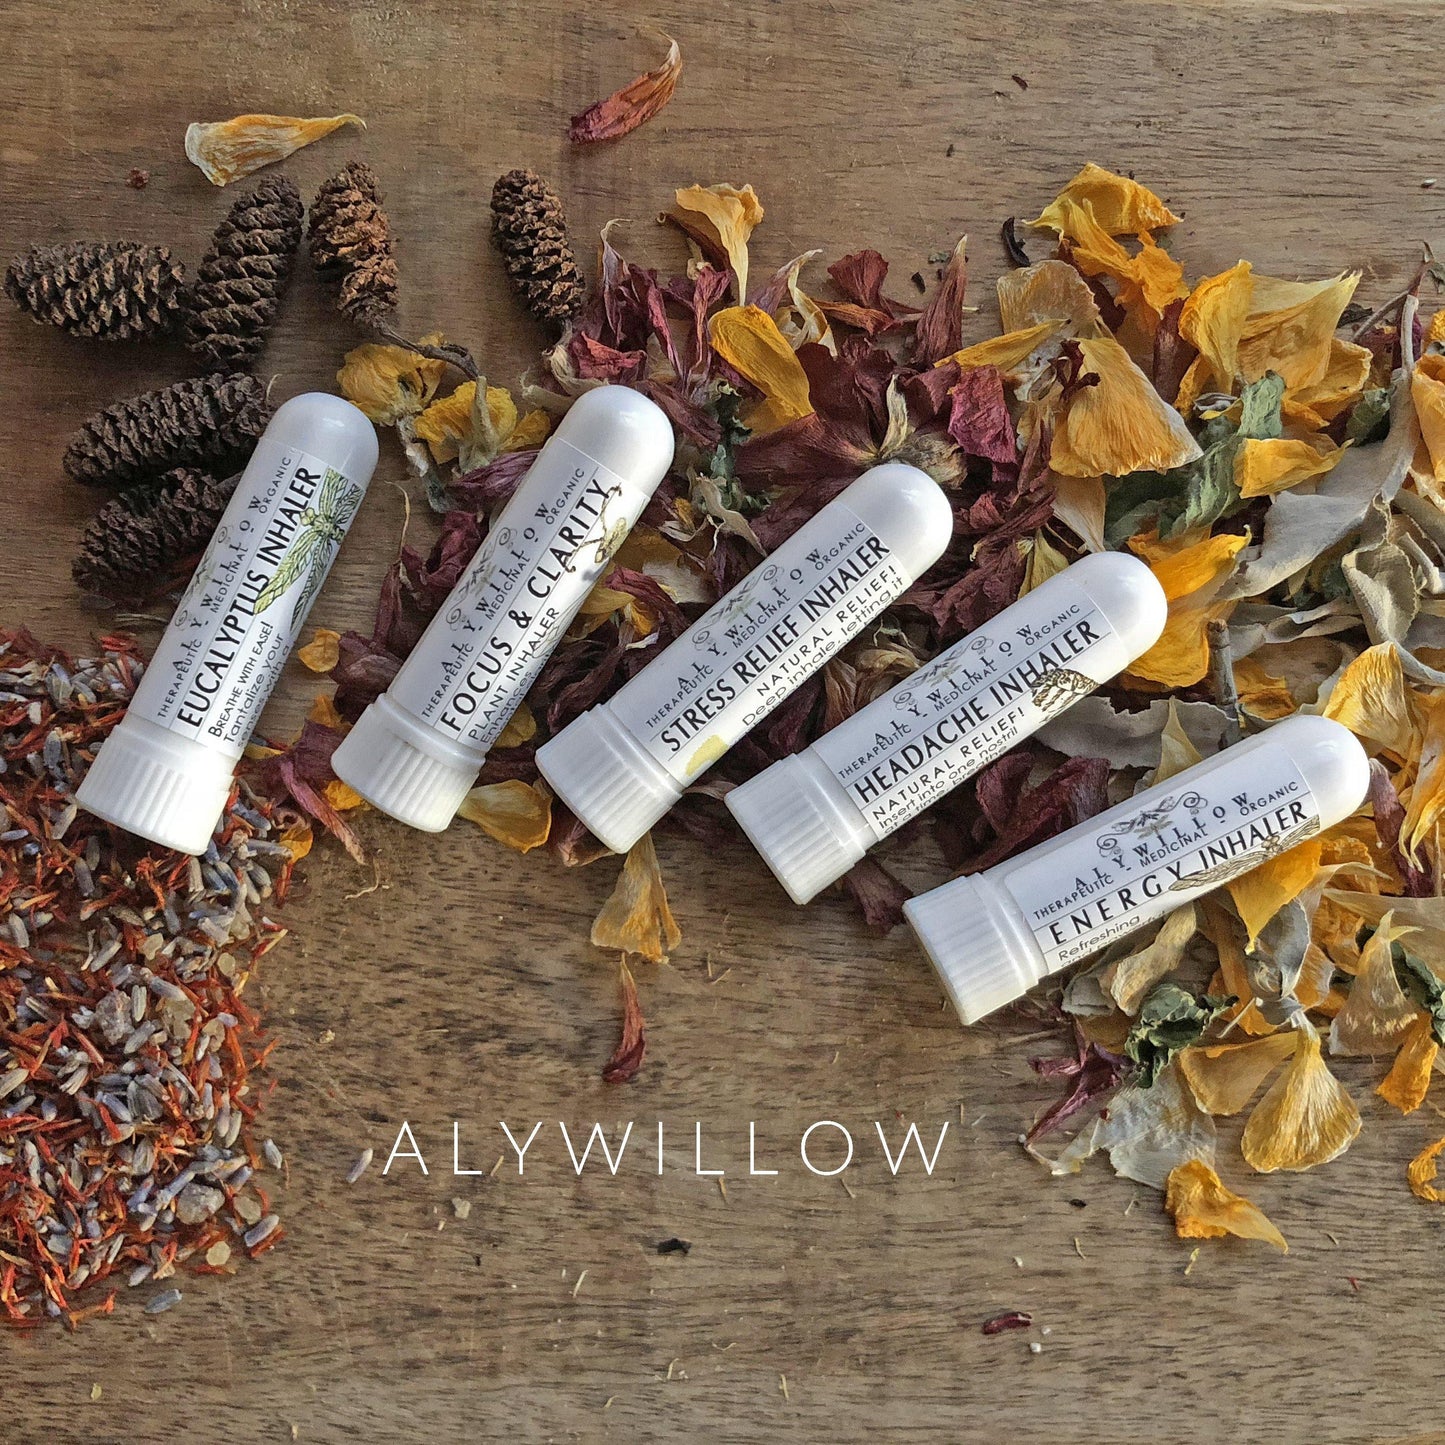 STRESS RELIEF Medicinal Plant Inhaler - Alywillow